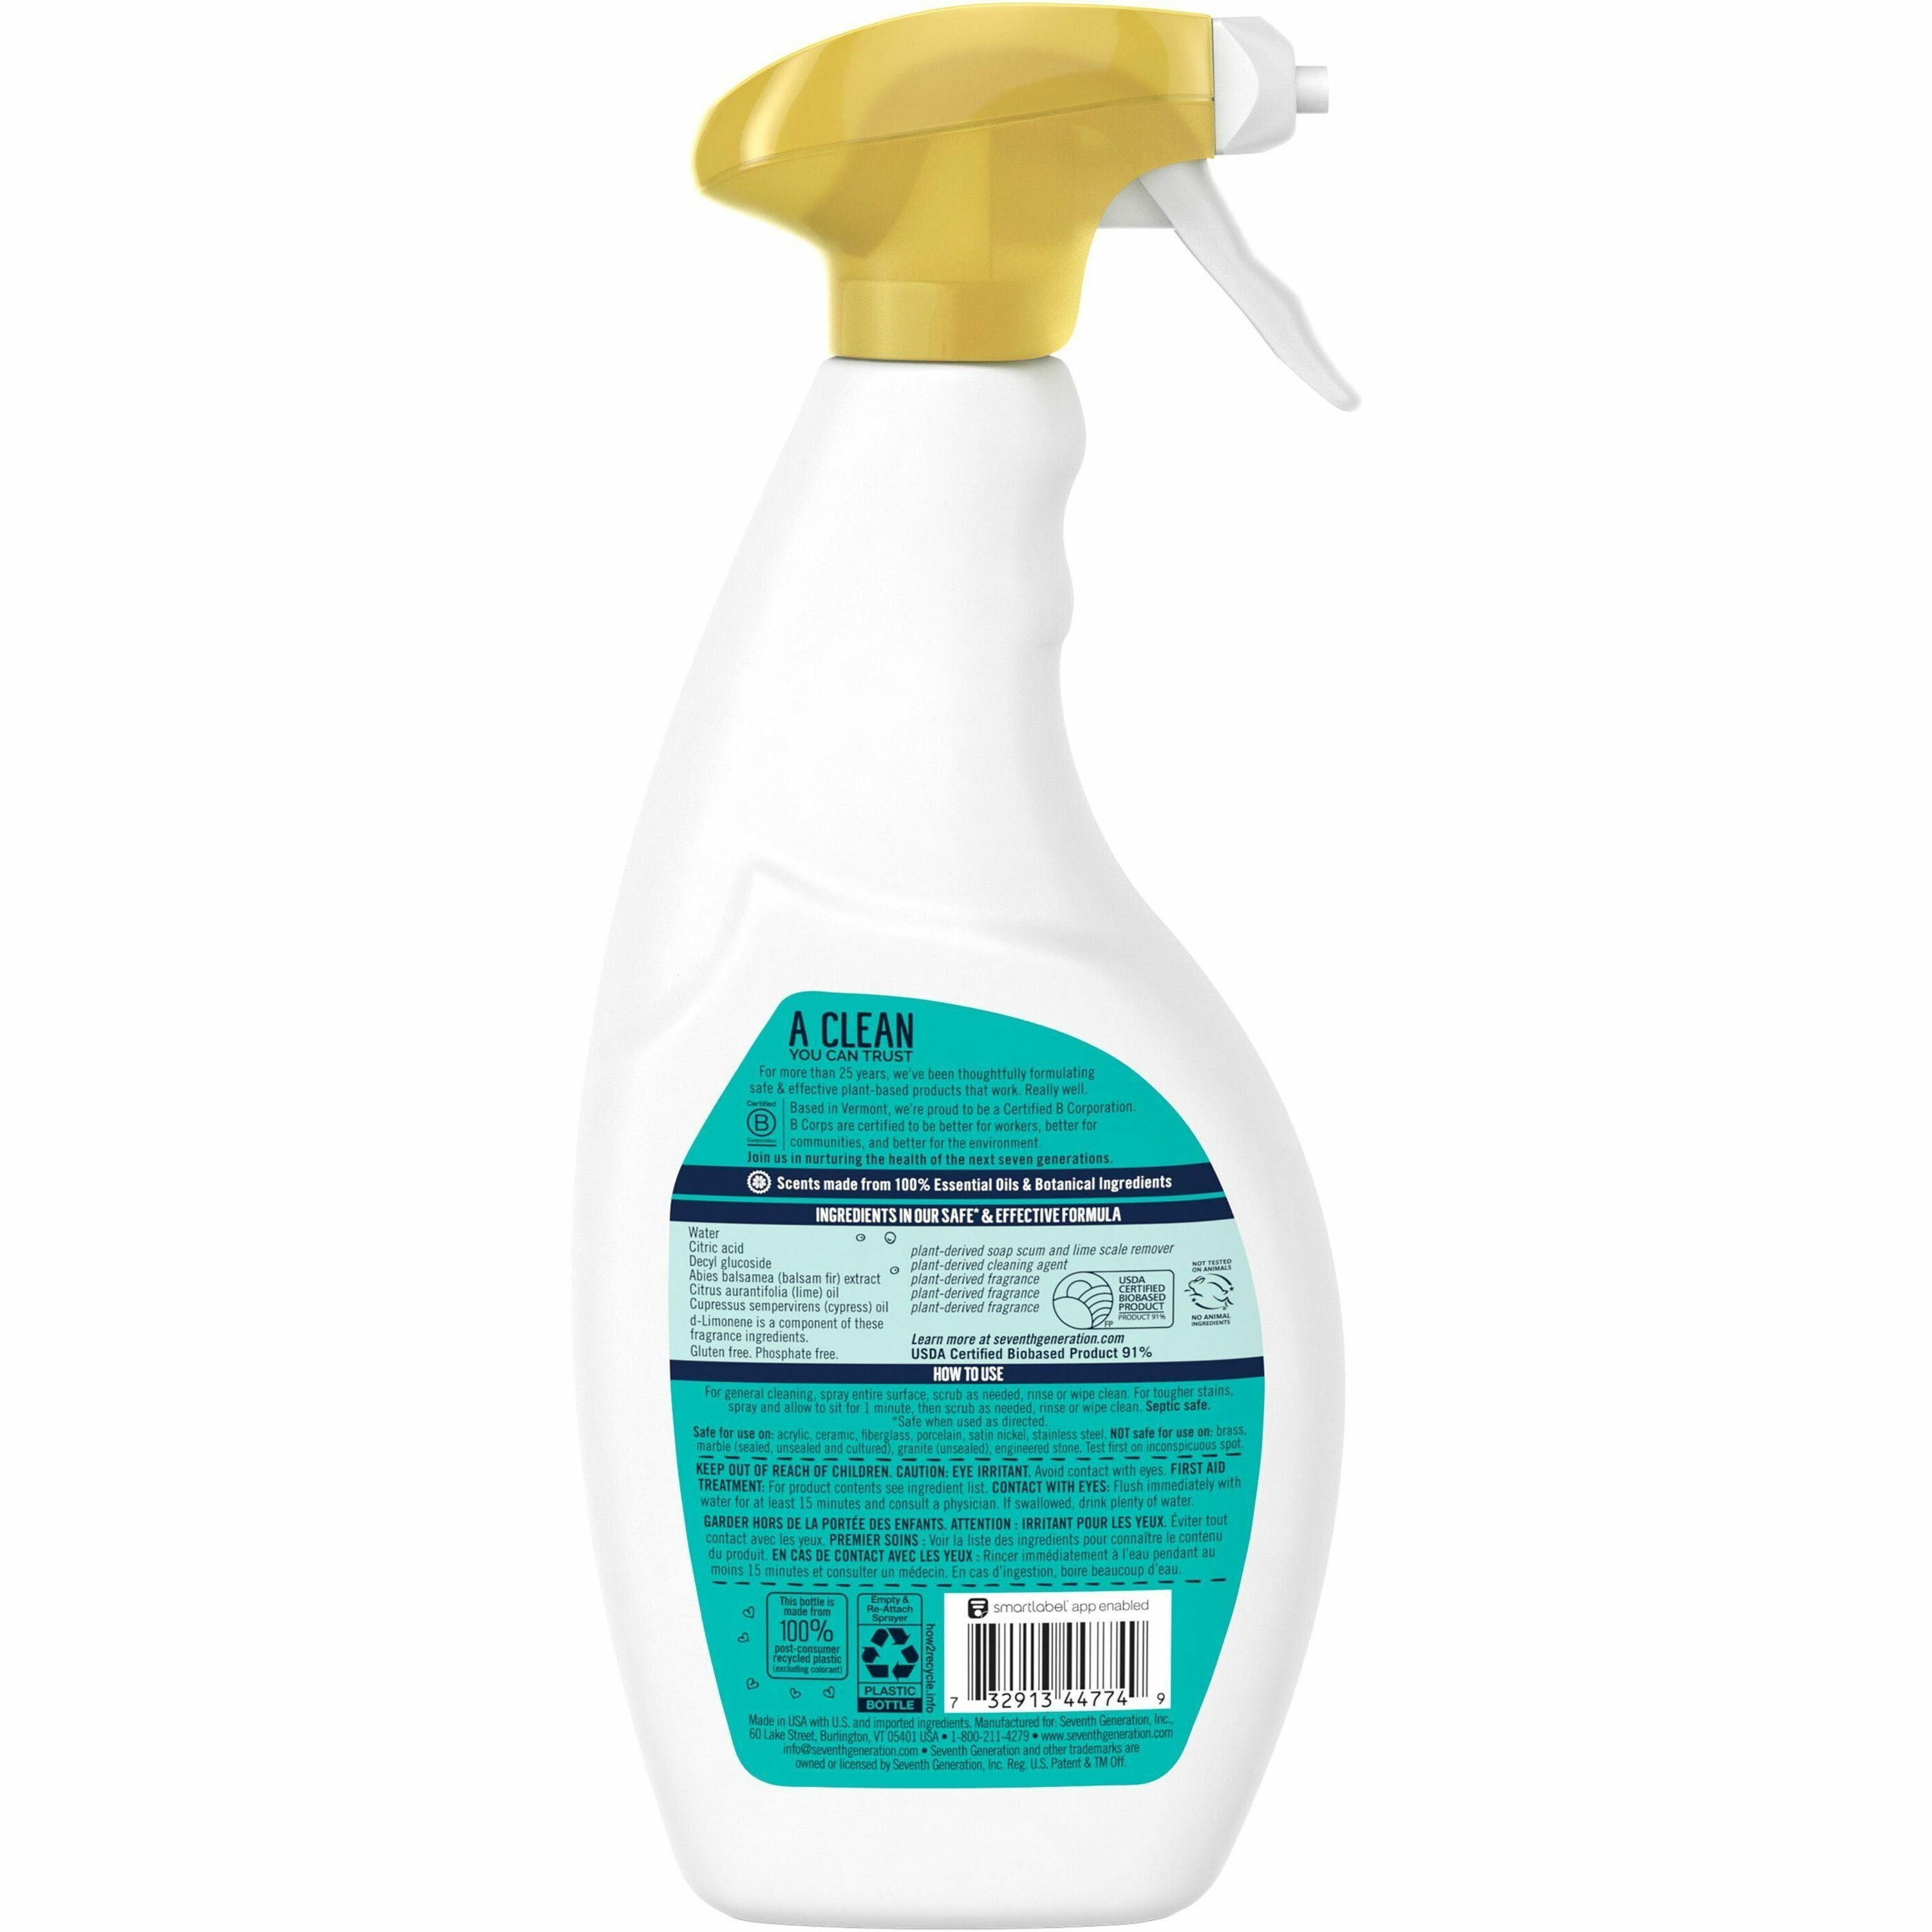 seventh-generation-natural-tub-and-tile-cleaner-concentrate-26-fl-oz-08-quart-emerald-cypress-&-fir-scent-1-each-non-toxic-fume-free-bio-based-kosher-dye-free-gluten-free-chlorine-free-bleach-free-white-multi_sev44774 - 2